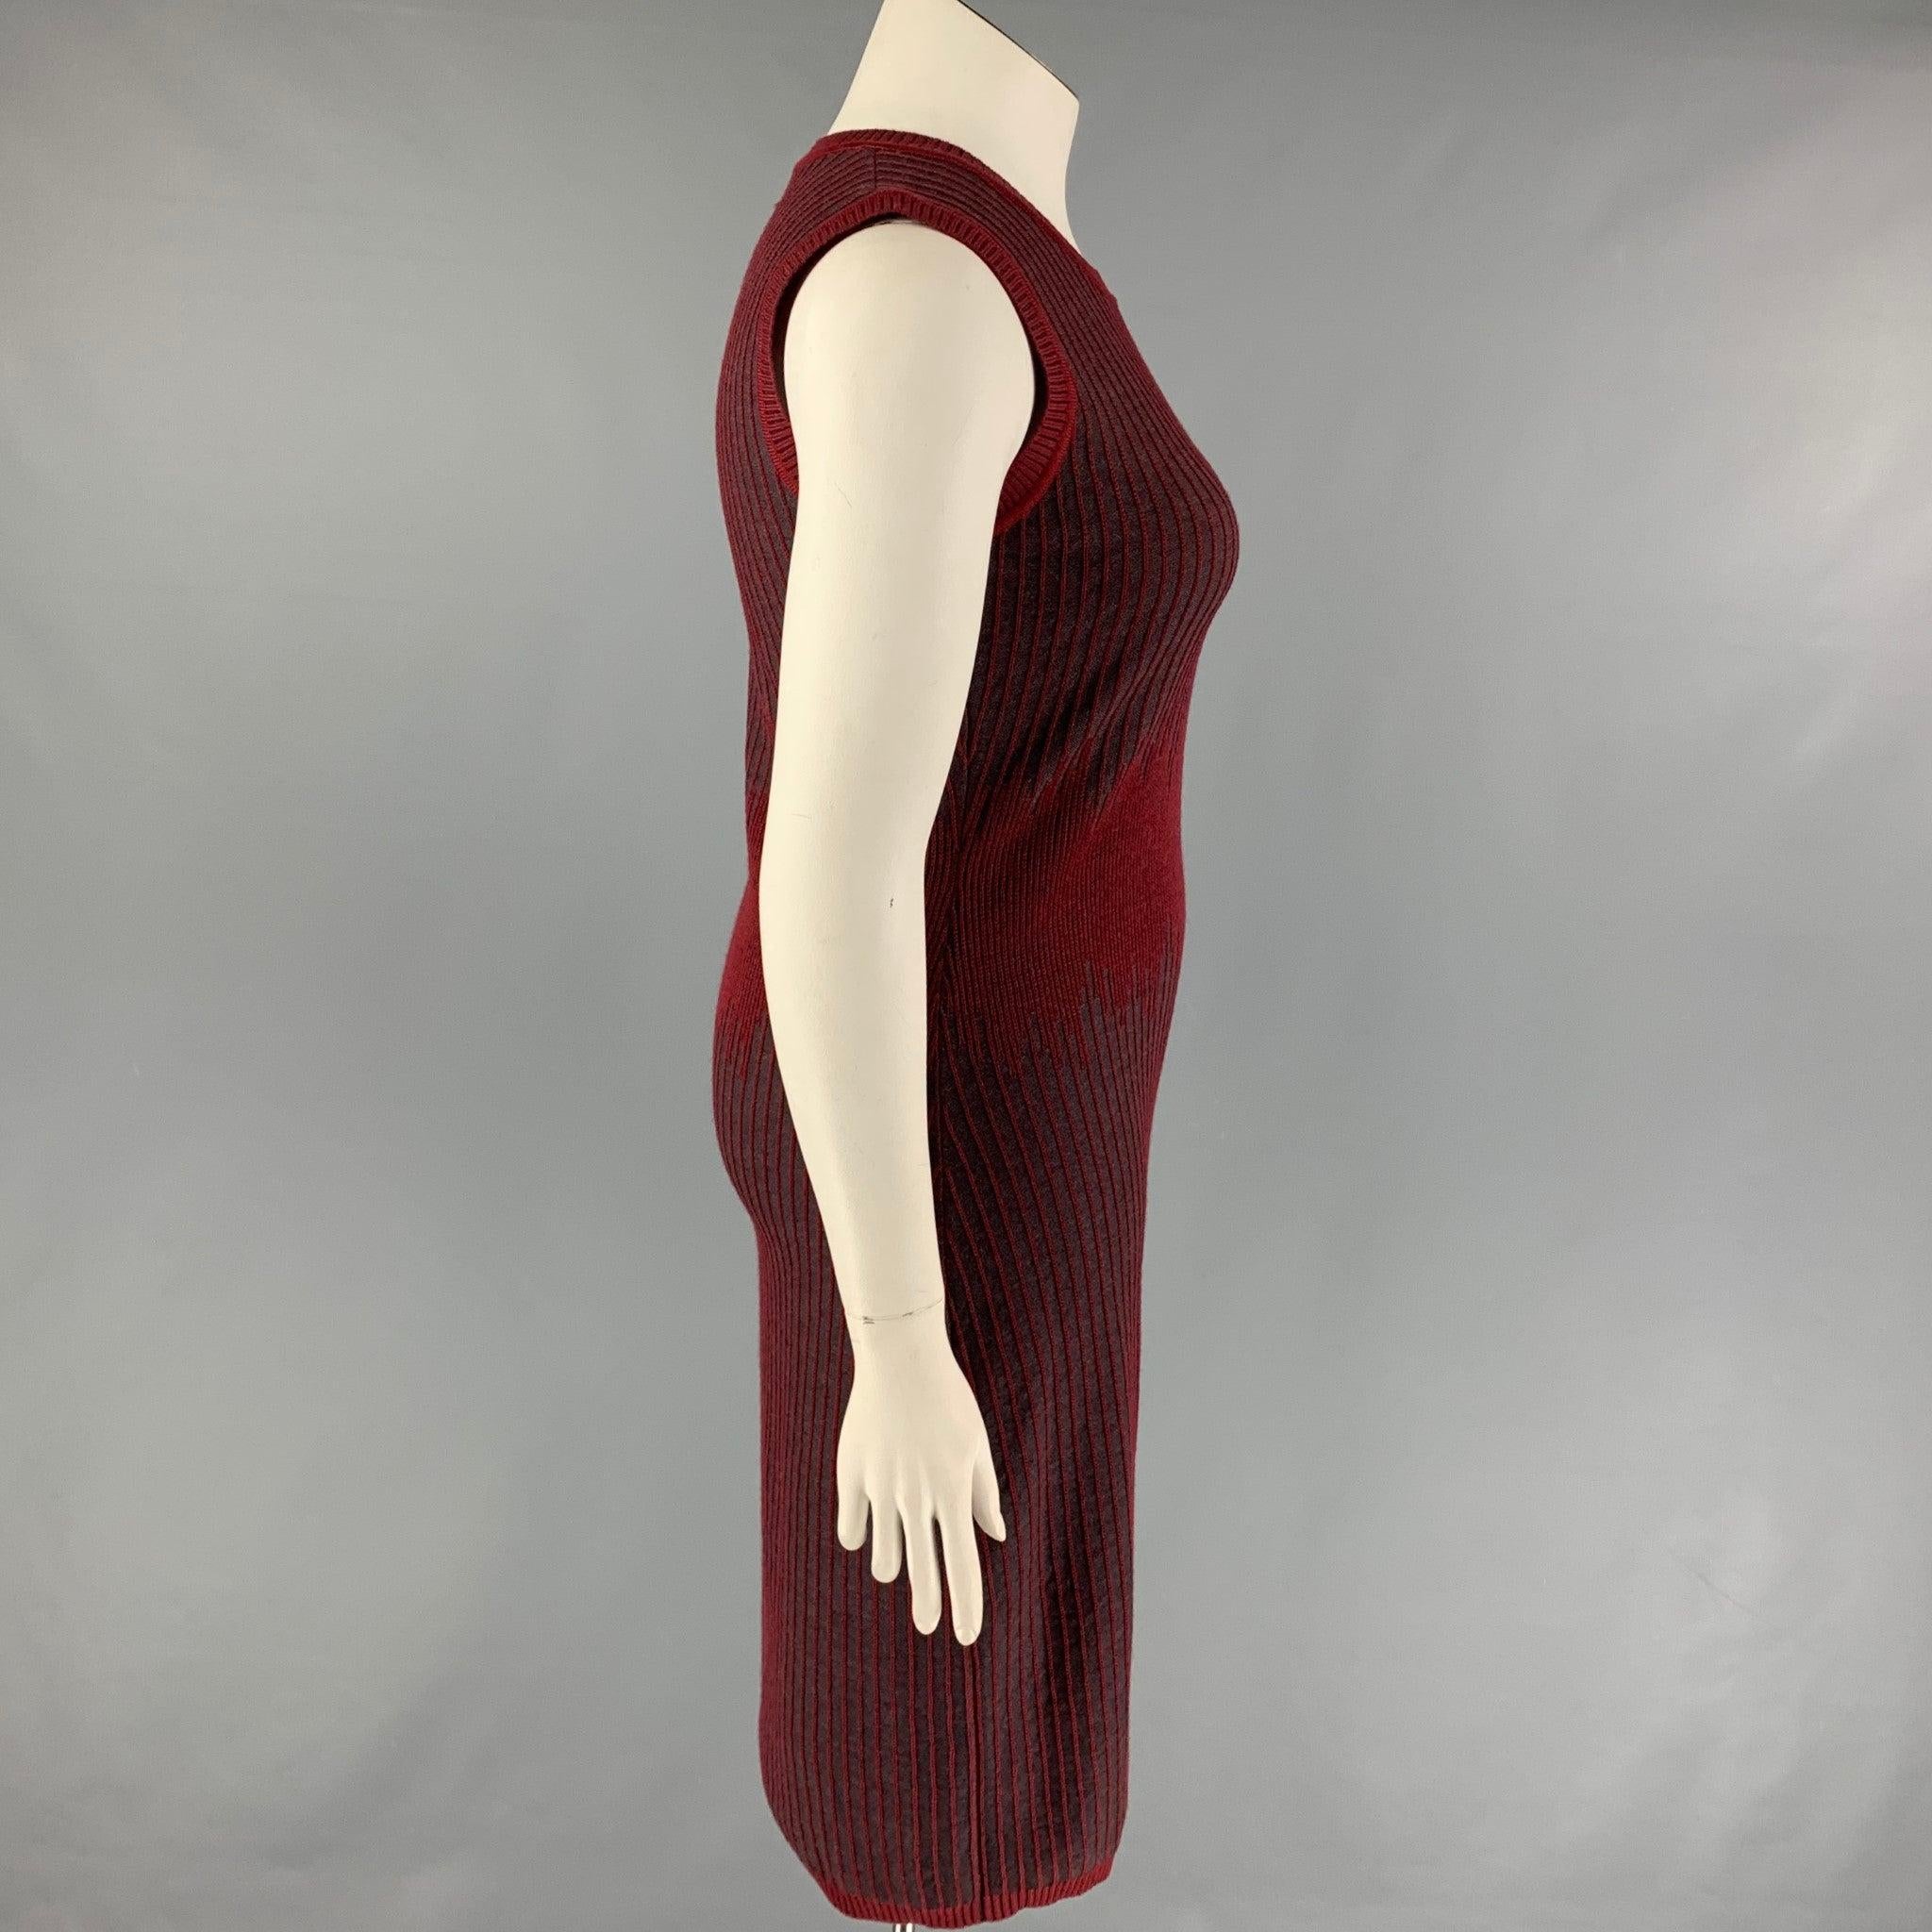 CAROLINA HERRERA dress comes in a burgundy & grey knitted stripe wool 
featuring a sheath style, sleeveless, and a ribbed hem. Made in Italy.
New With Tags.
 

Marked:   L 

Measurements: 
 
Shoulder: 15 inches  Bust: 35 inches  Waist: 30 inches 